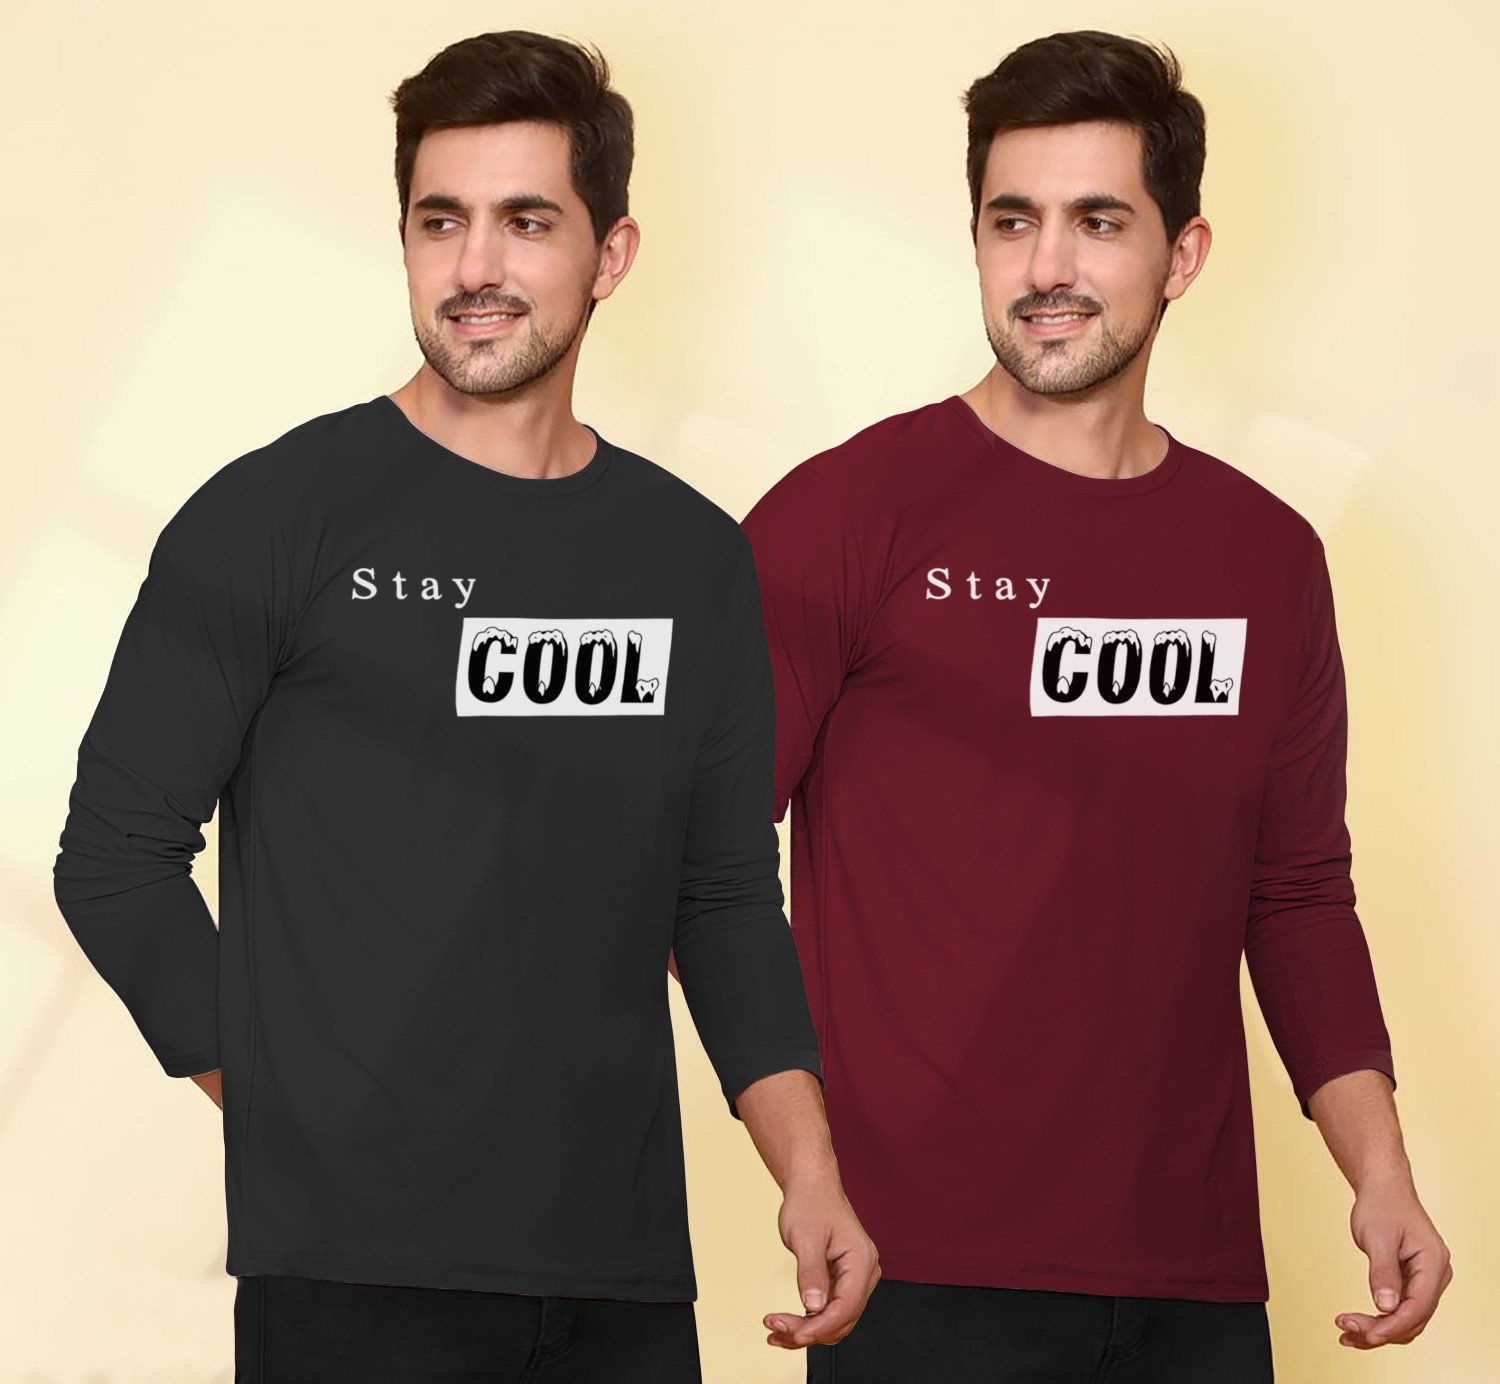 LG Garments Trendy Stylish Round Neck Full Sleeves Cotton T-Shirts For Men - Multi-colour (Combo Pack Of 2) | Men's T-Shirt (2 in 1) (S, M, L, XL, XXL)